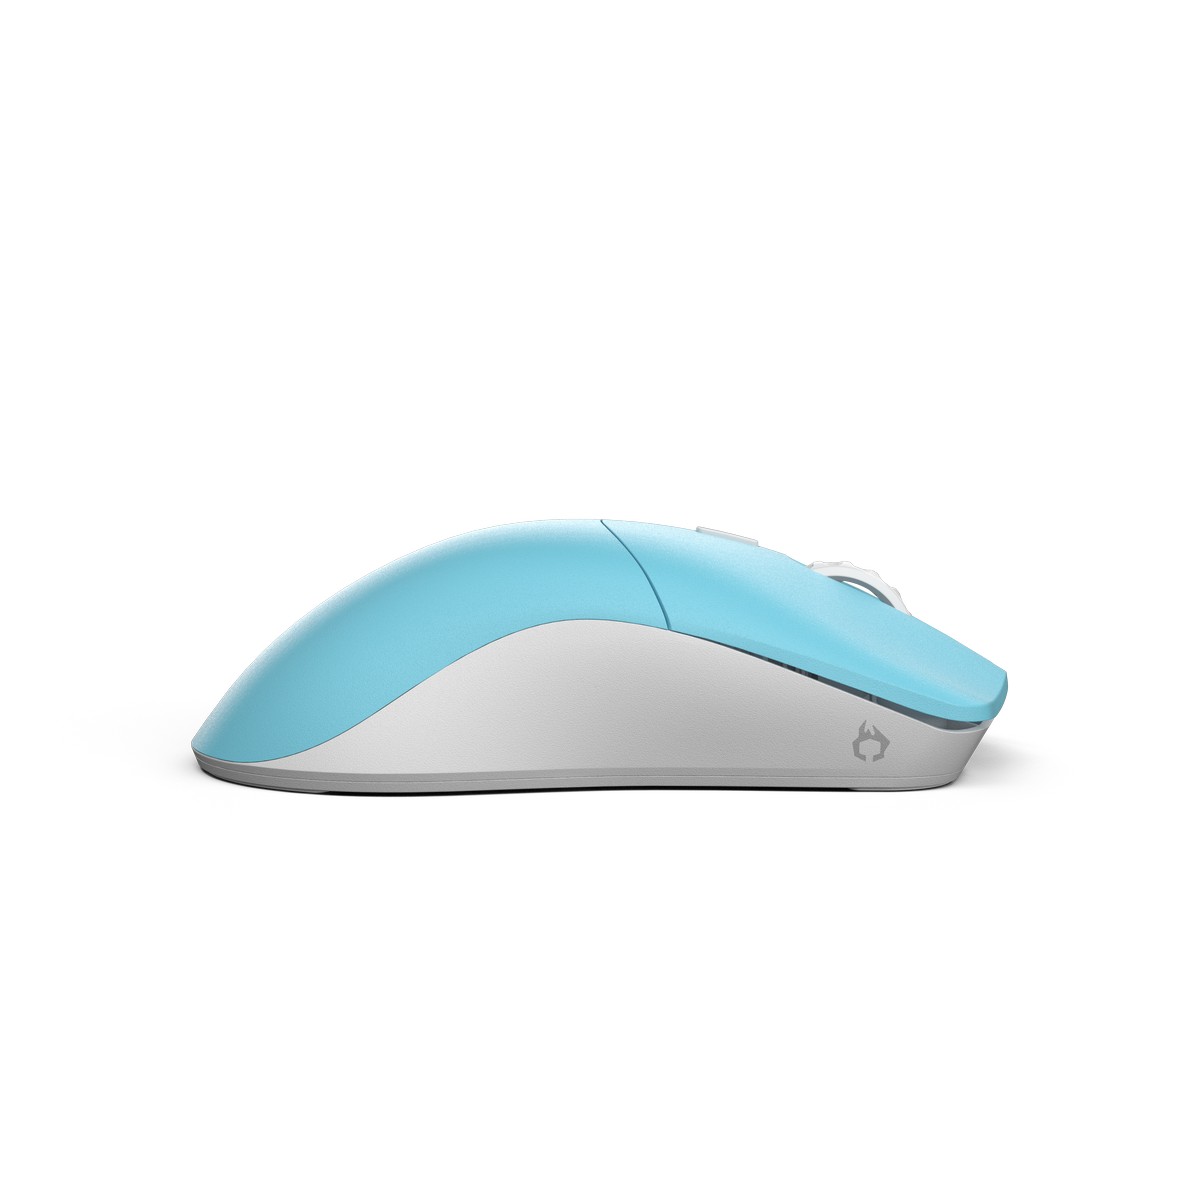 Glorious - Glorious Model O PRO Wireless Optical Gaming Mouse - Blue Lynx (GLO-MS-OW-BL-FORGE)